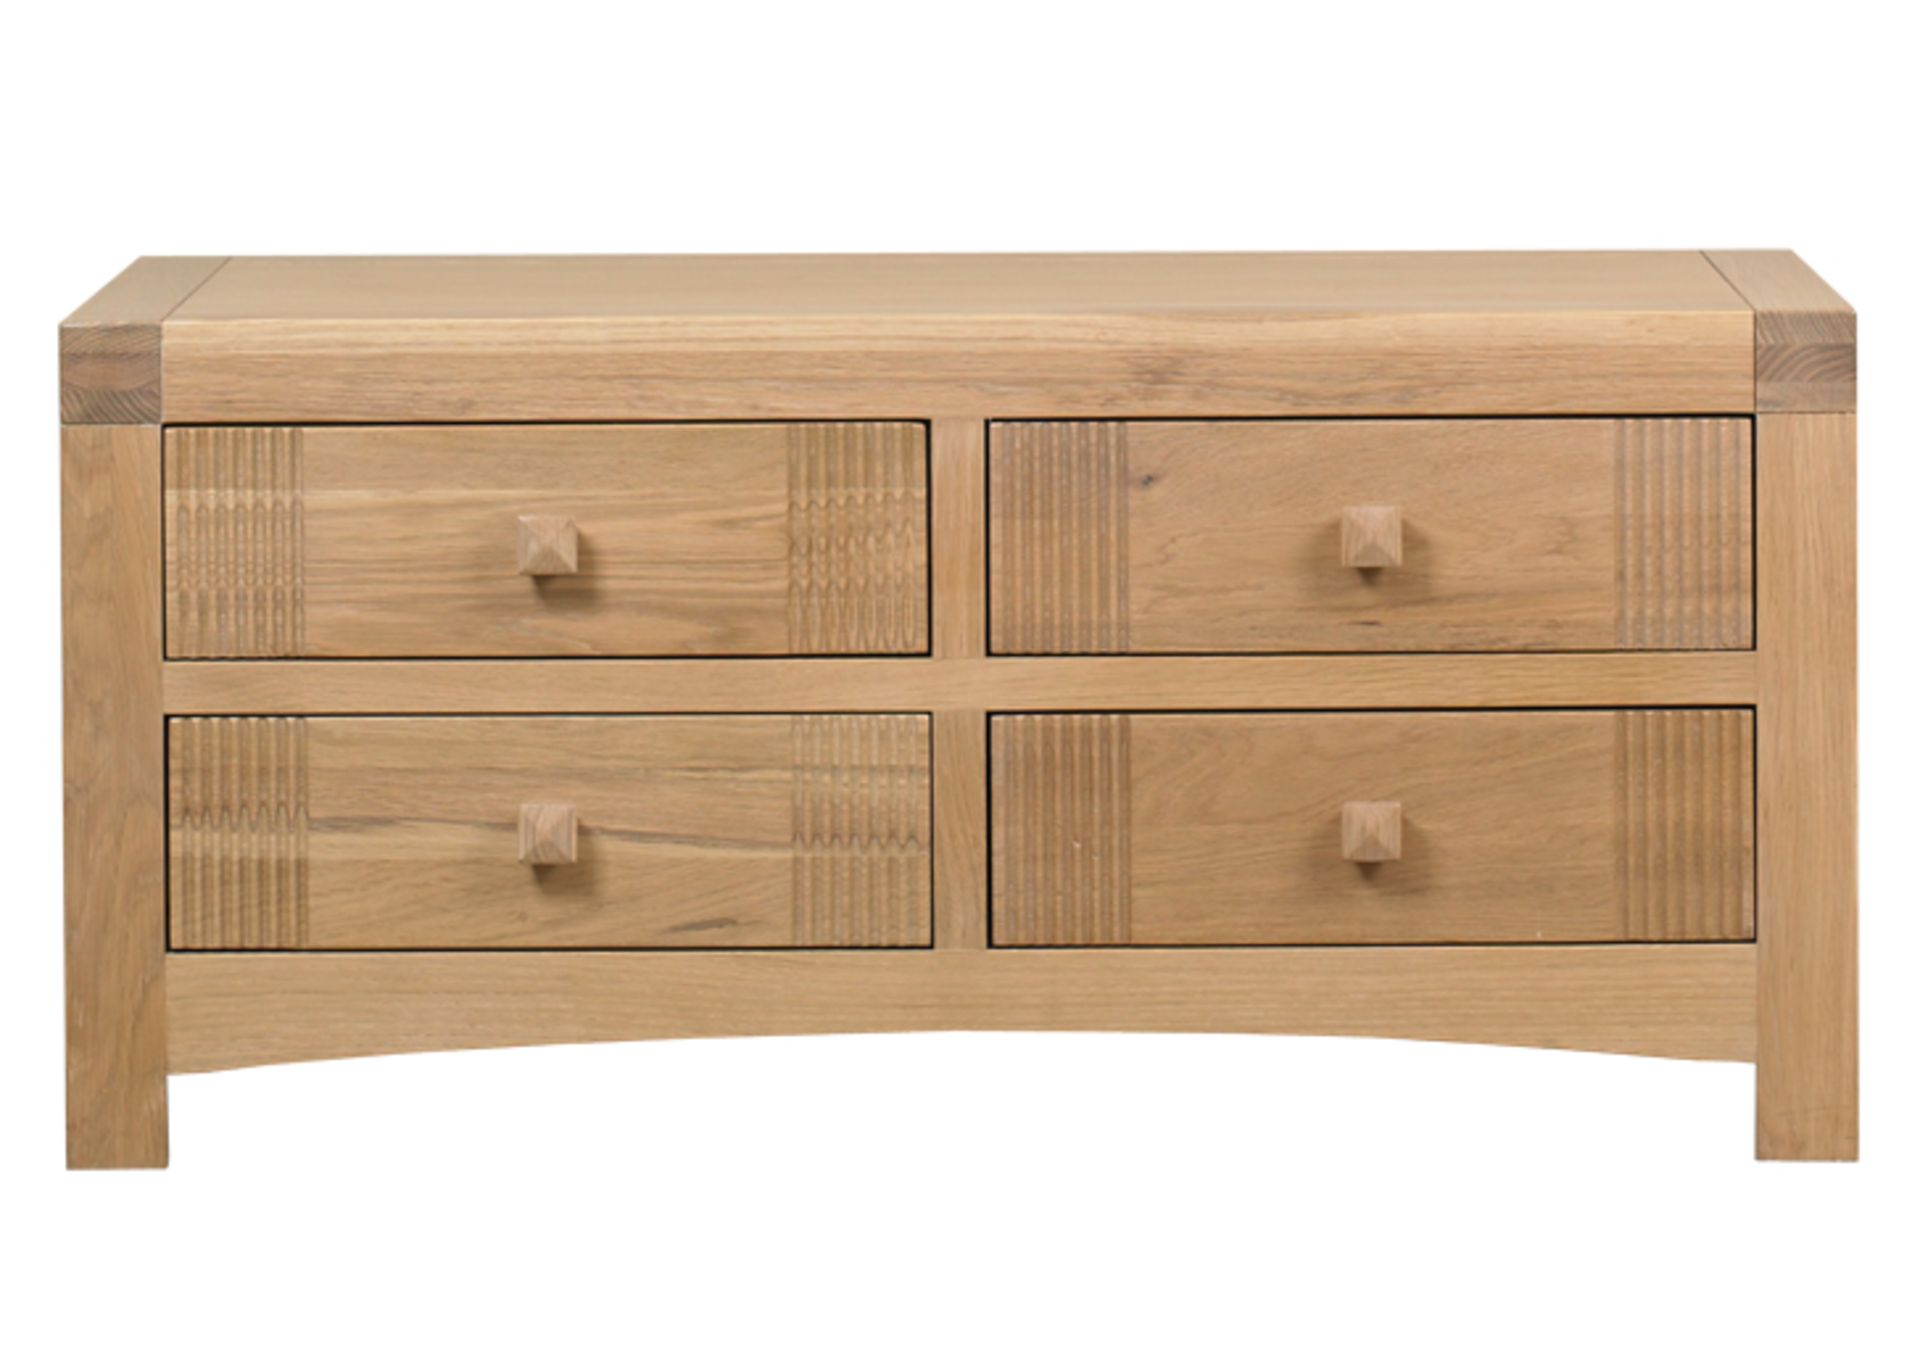 1 x Mark Webster Buckingham Coffee Table With Drawers - White Wash Oak With a Timeless Design - Full